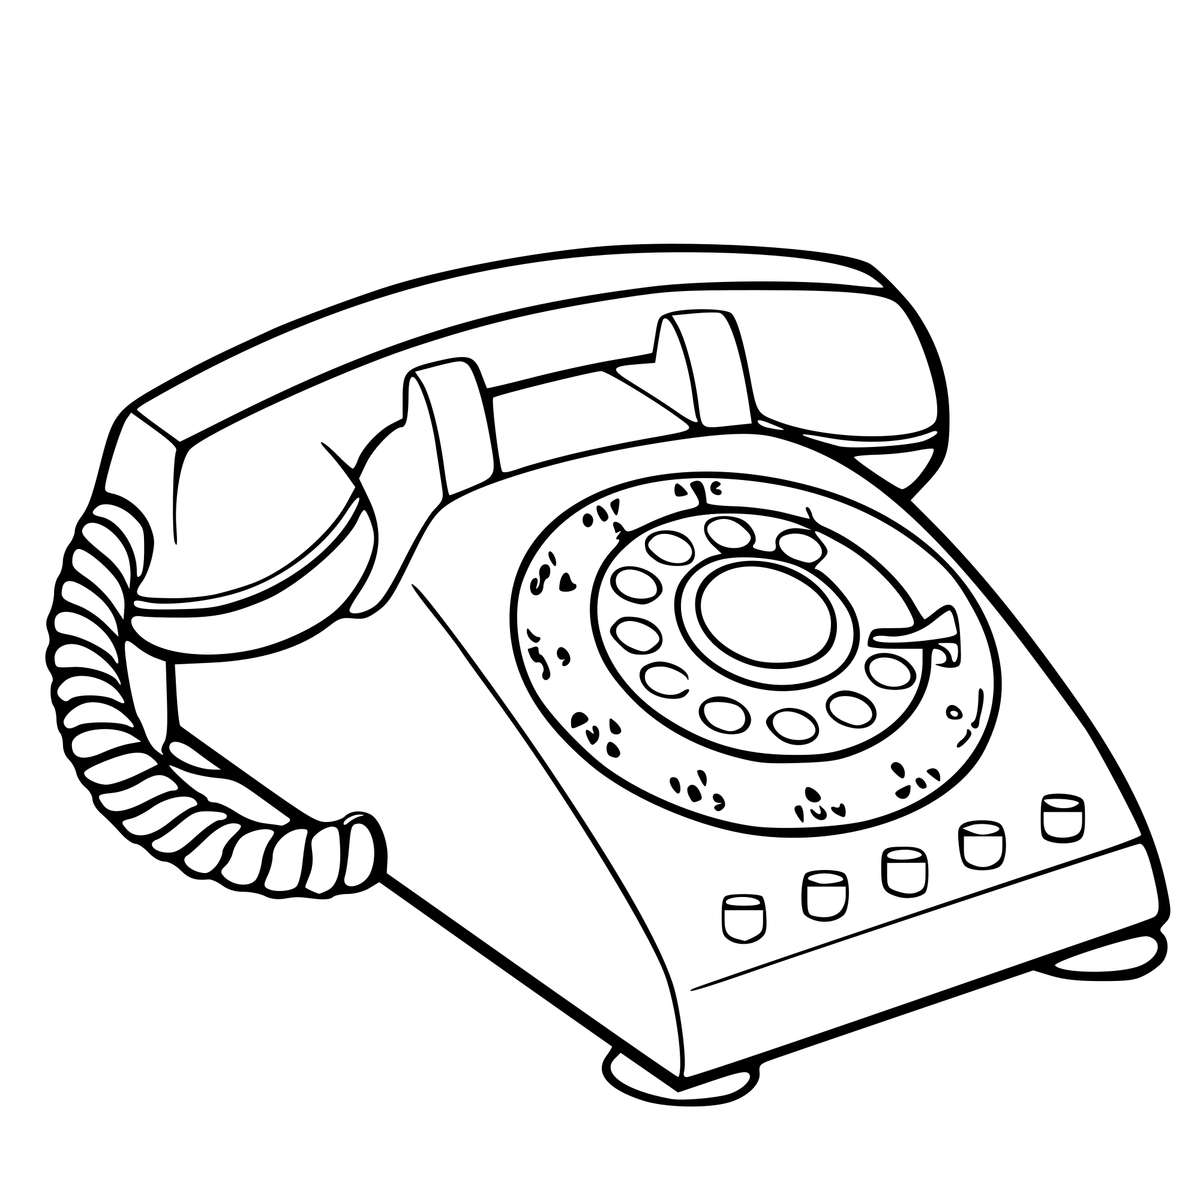 Telephone puzzle online from photo